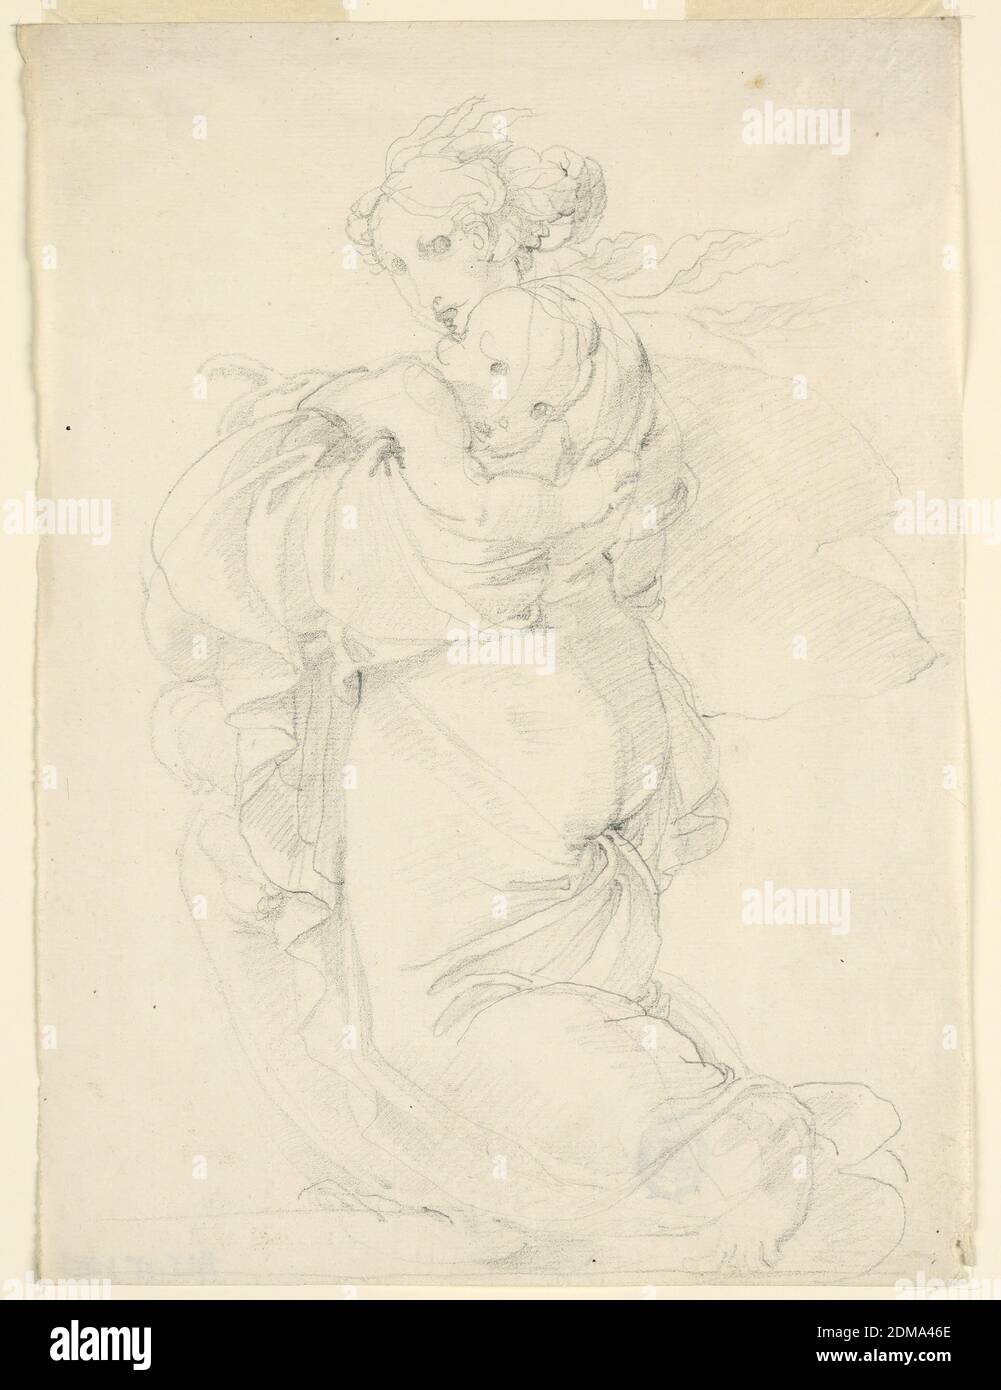 The Virgin and Child, Fortunato Duranti, Italian, 1787 - 1863, Graphite, impressed lines on paper, The Virgin walks toward the left, carrying the Child in her left arm., Rome, Italy, 1820–1850, Drawing Stock Photo